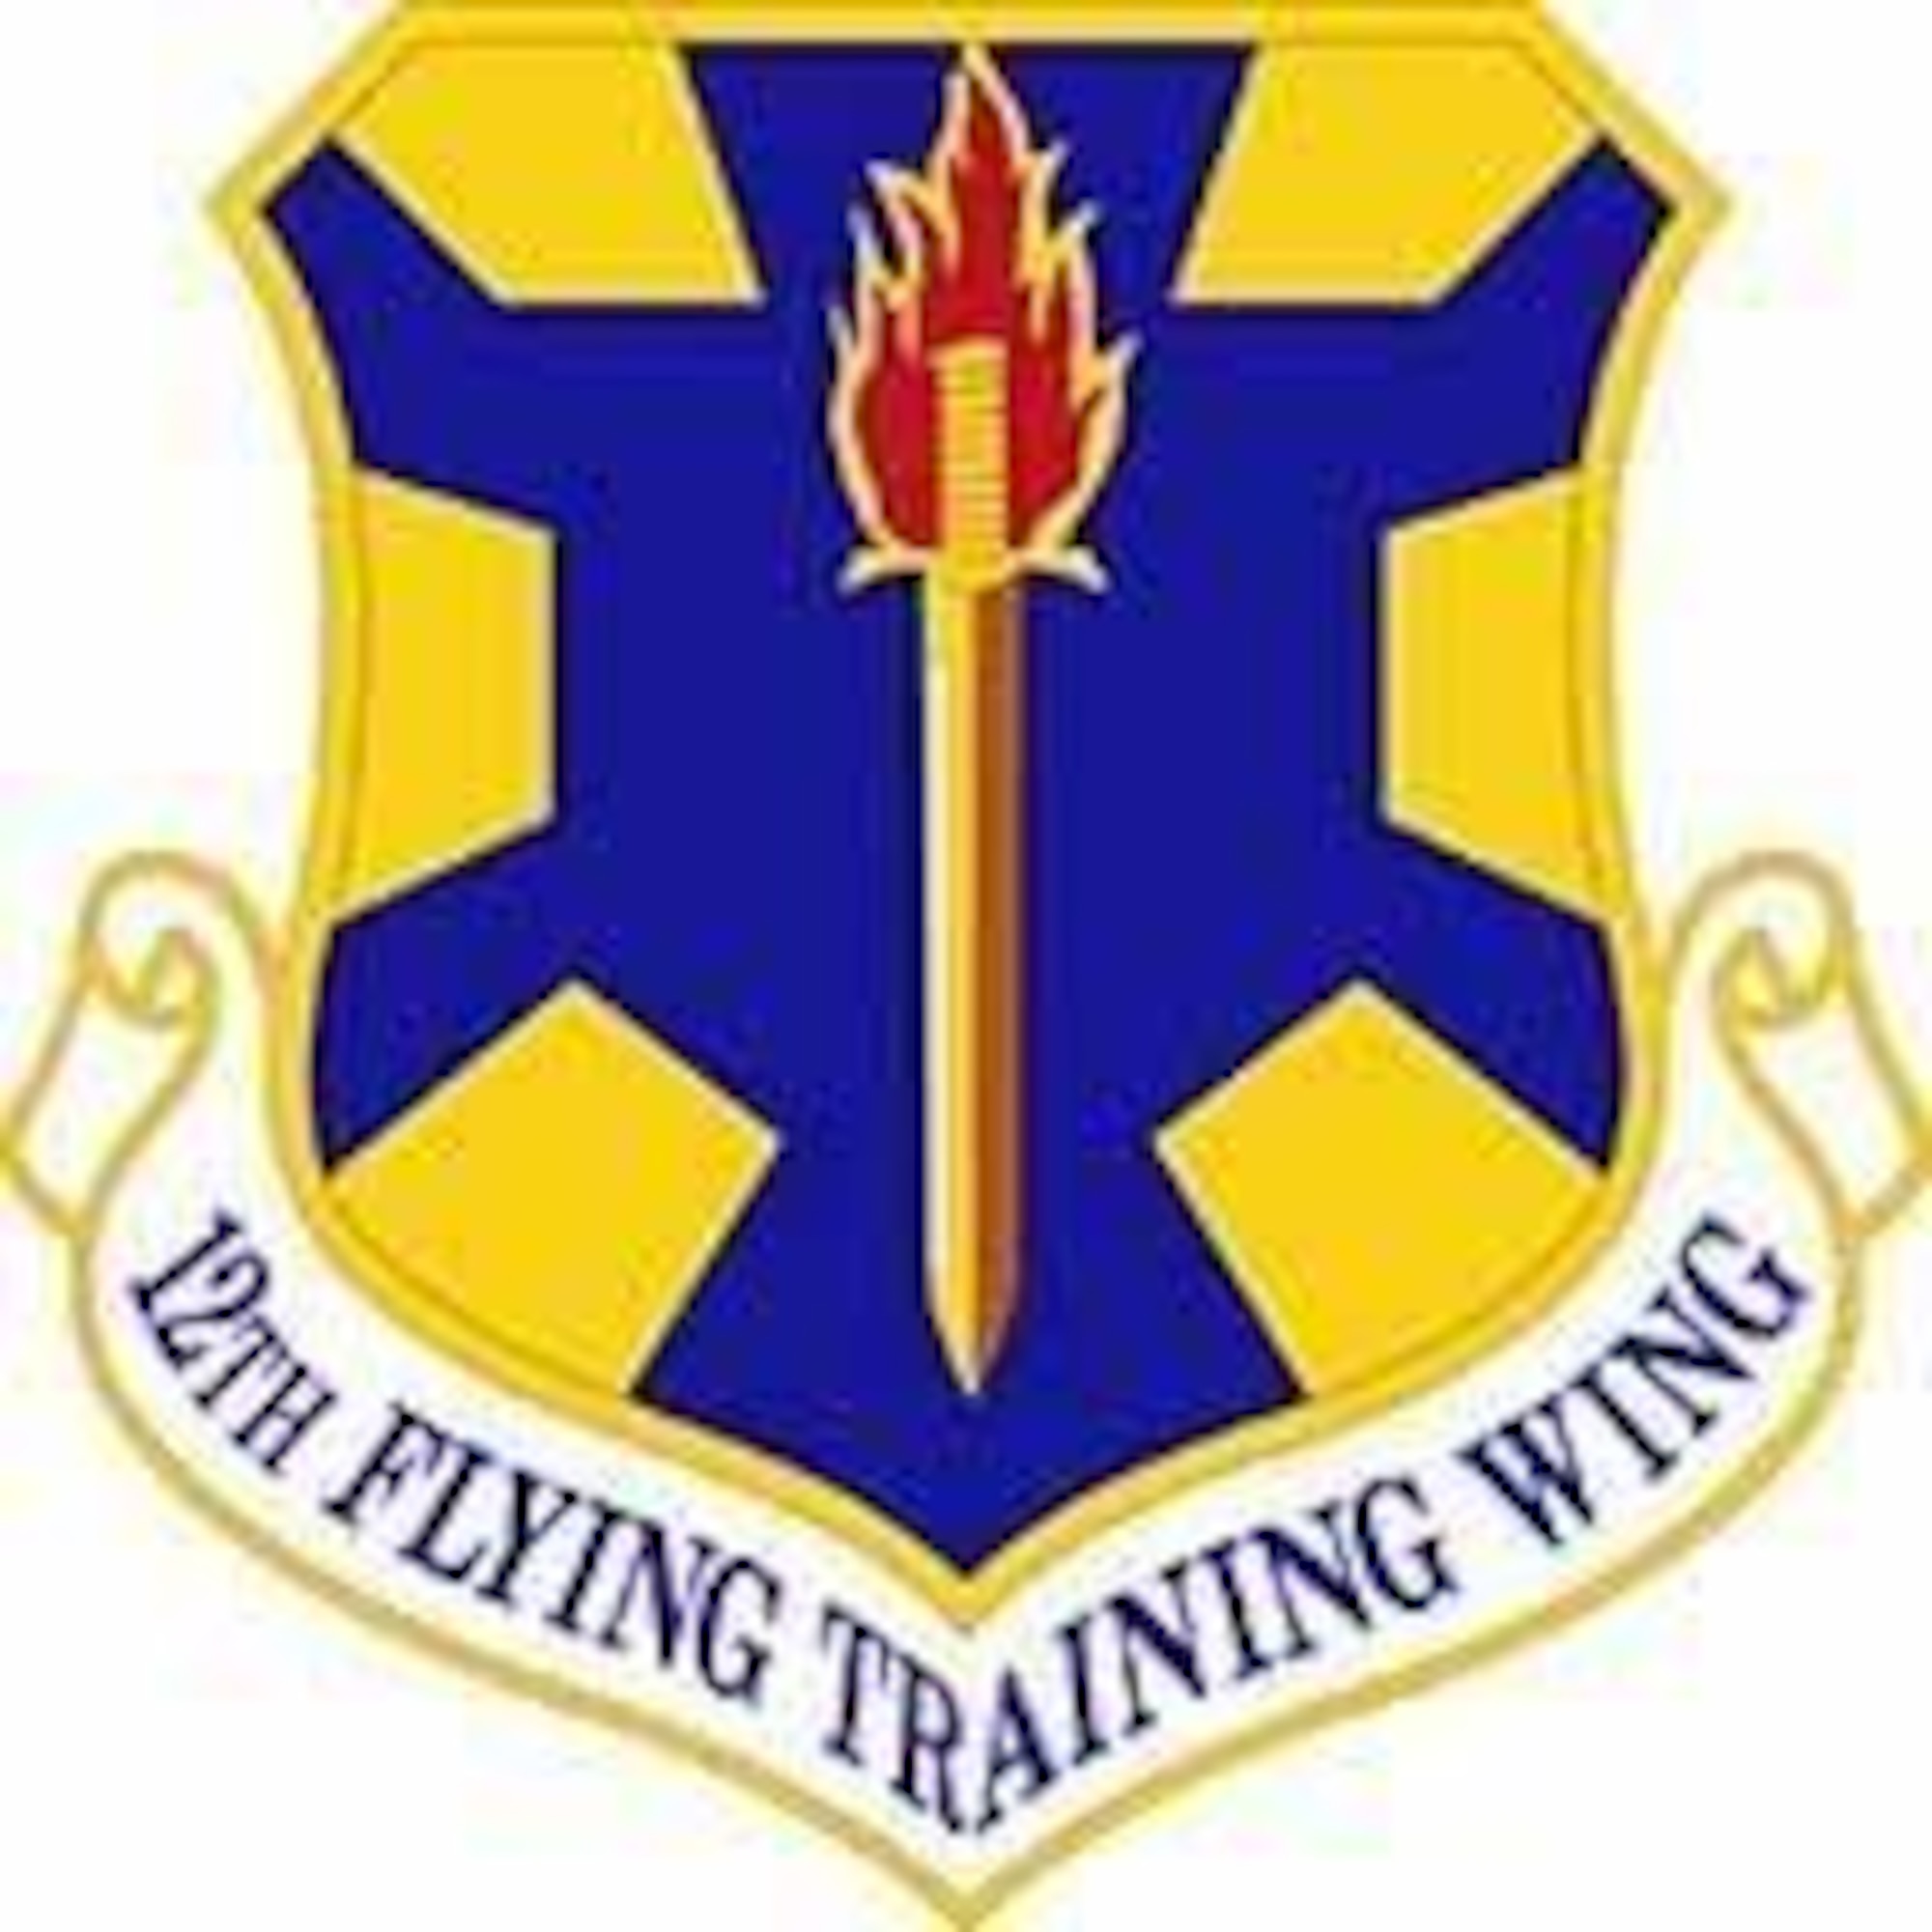 As social distancing and shelter-in-place efforts intensified in April as a result of the COVID-19 pandemic, two 12th Flying Training Wing units kept in step with public health directives by conducting the wing’s first virtual ceremonies.